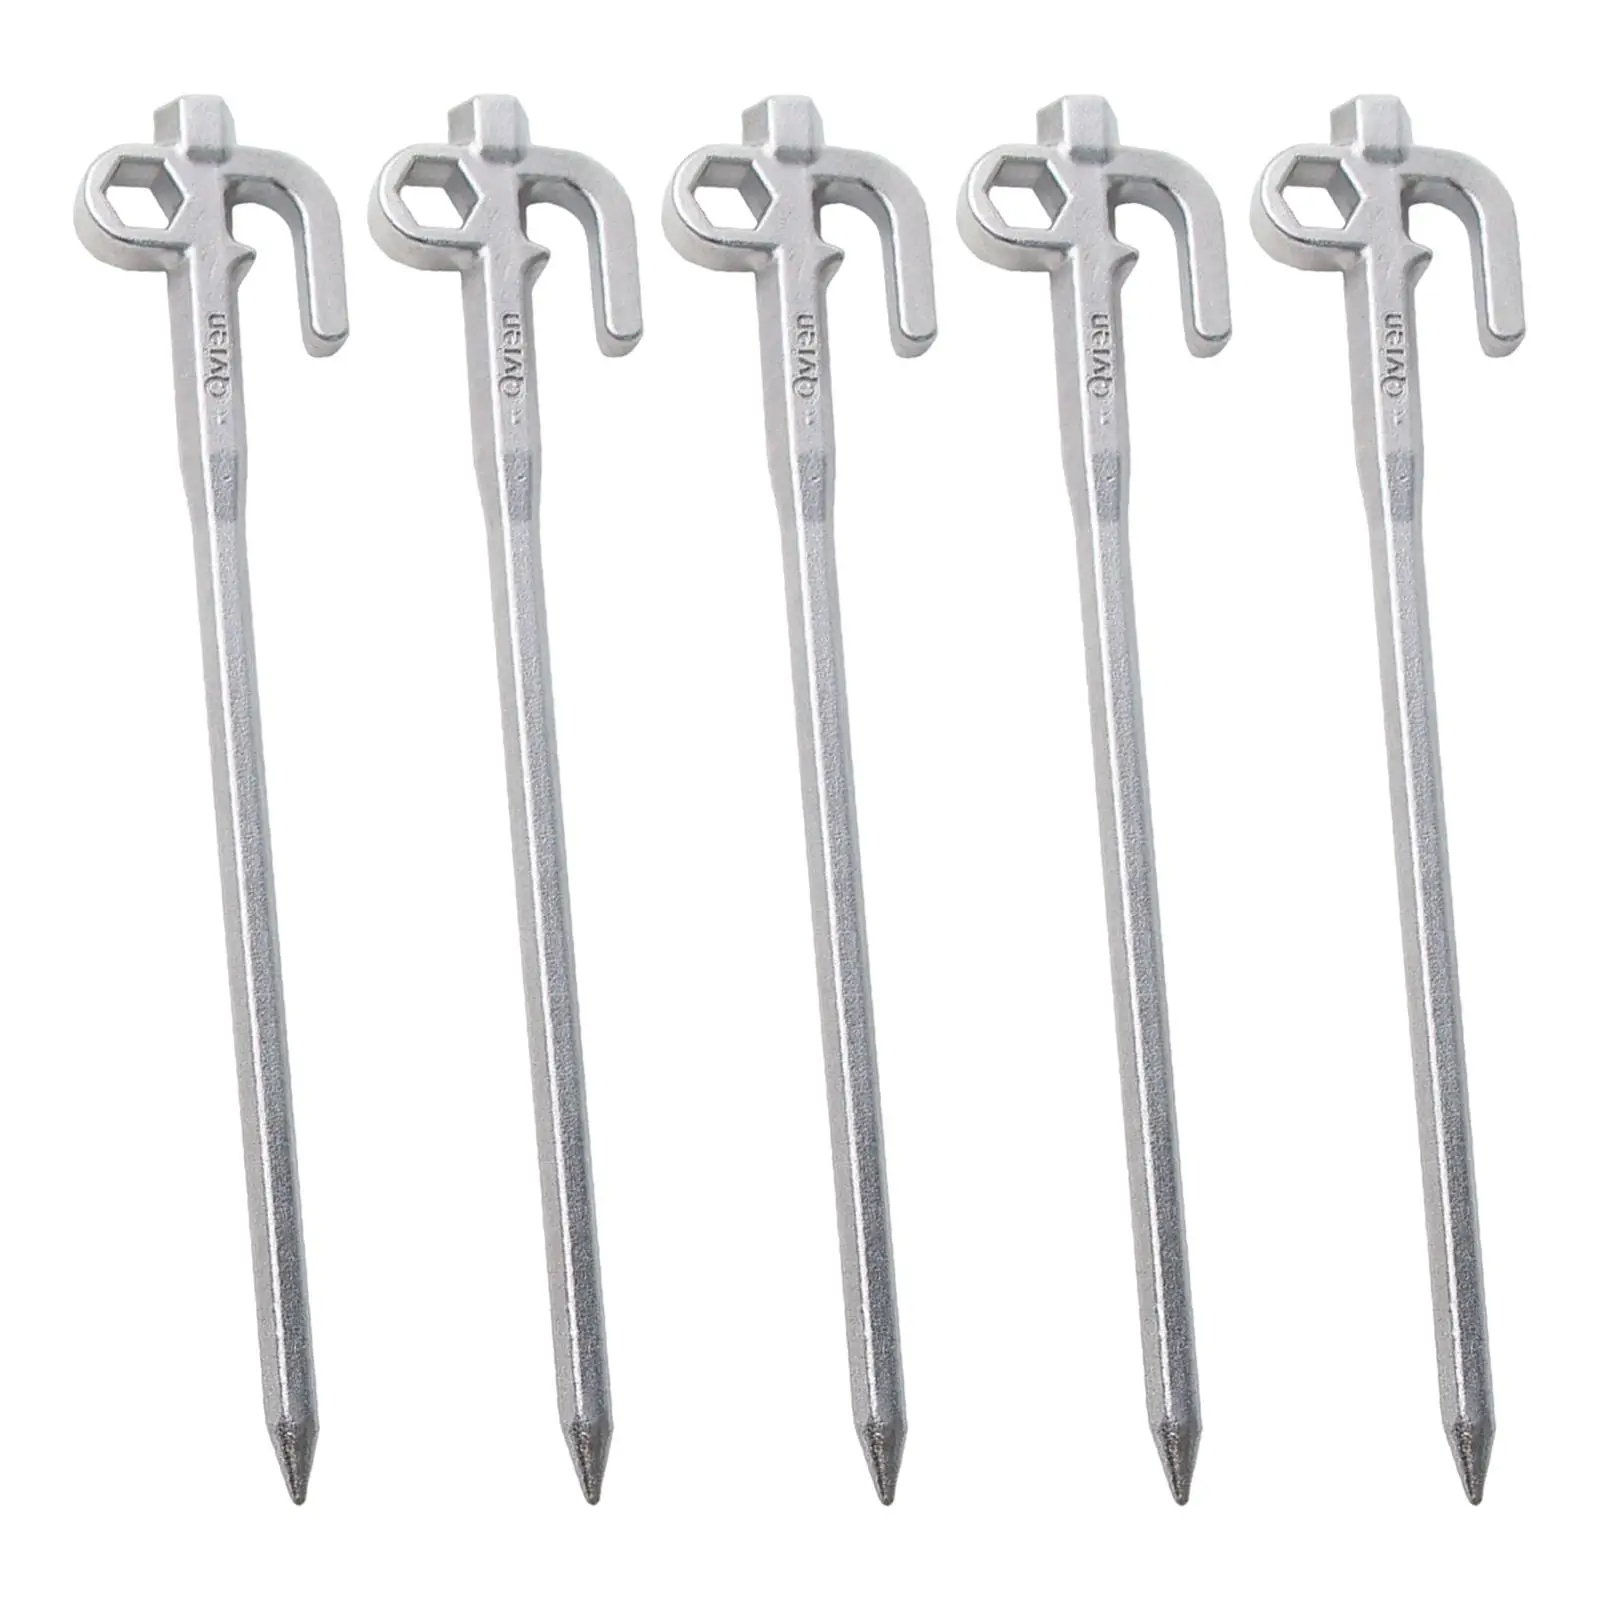 5 Pack Tent Stakes Heavy Duty Steel Tent Pegs for Camping Unbreakable and Inflexible